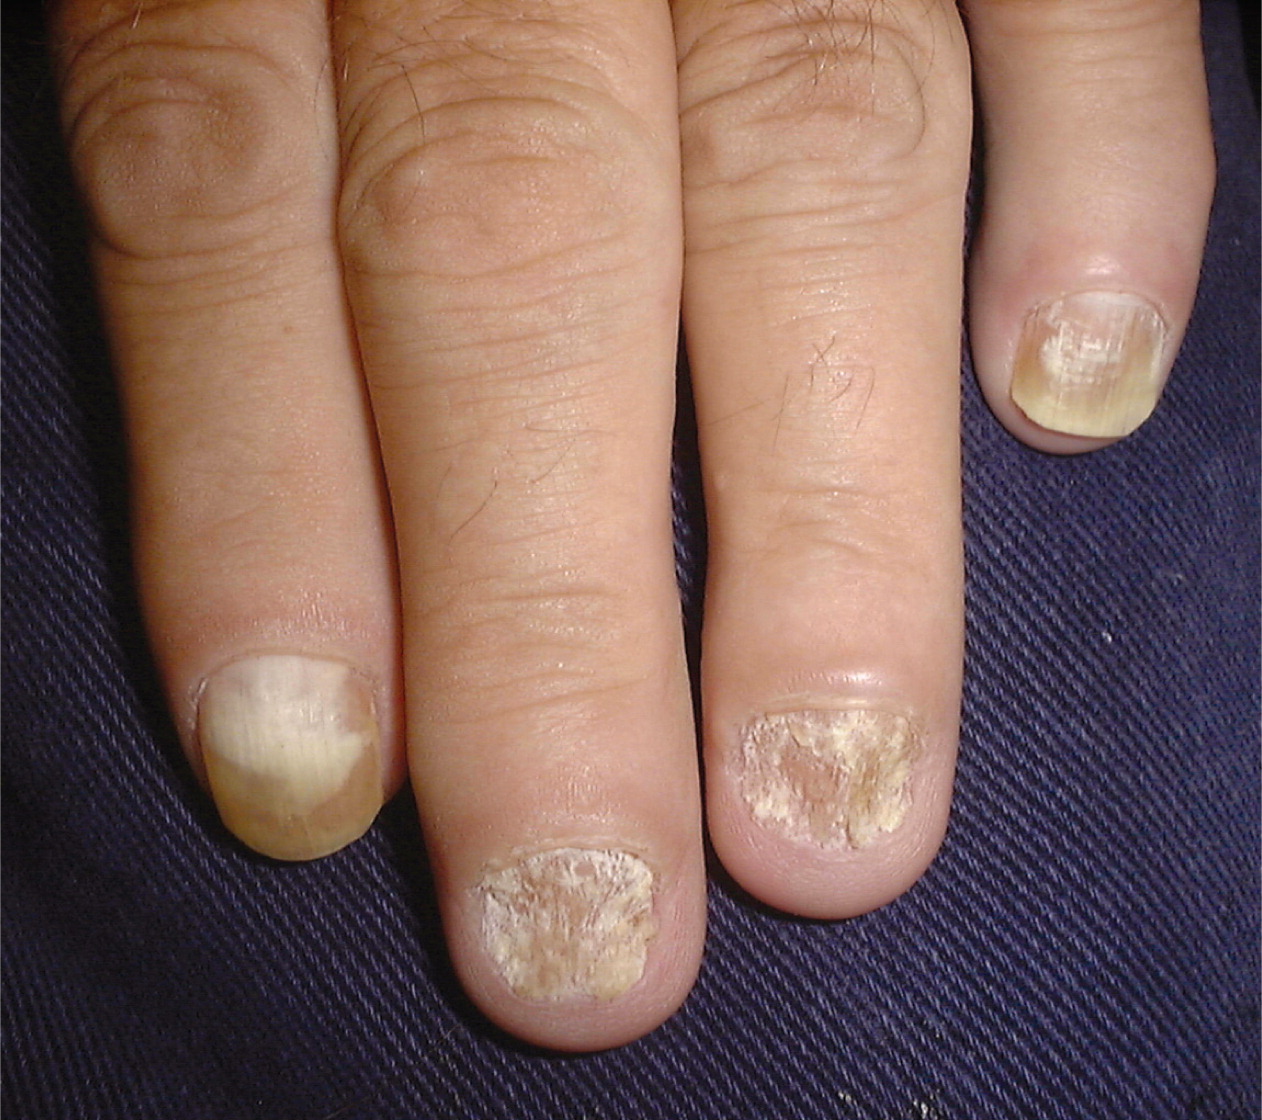 Medical Addicts - Info: Trachyonychia Trachyonychia clinically appears as  if the nails have been sandpapered in the longitudinal direction, which  leaves a rough-ridged texture. Sometimes the terms trachyonychia and 20-nail  dystrophy are